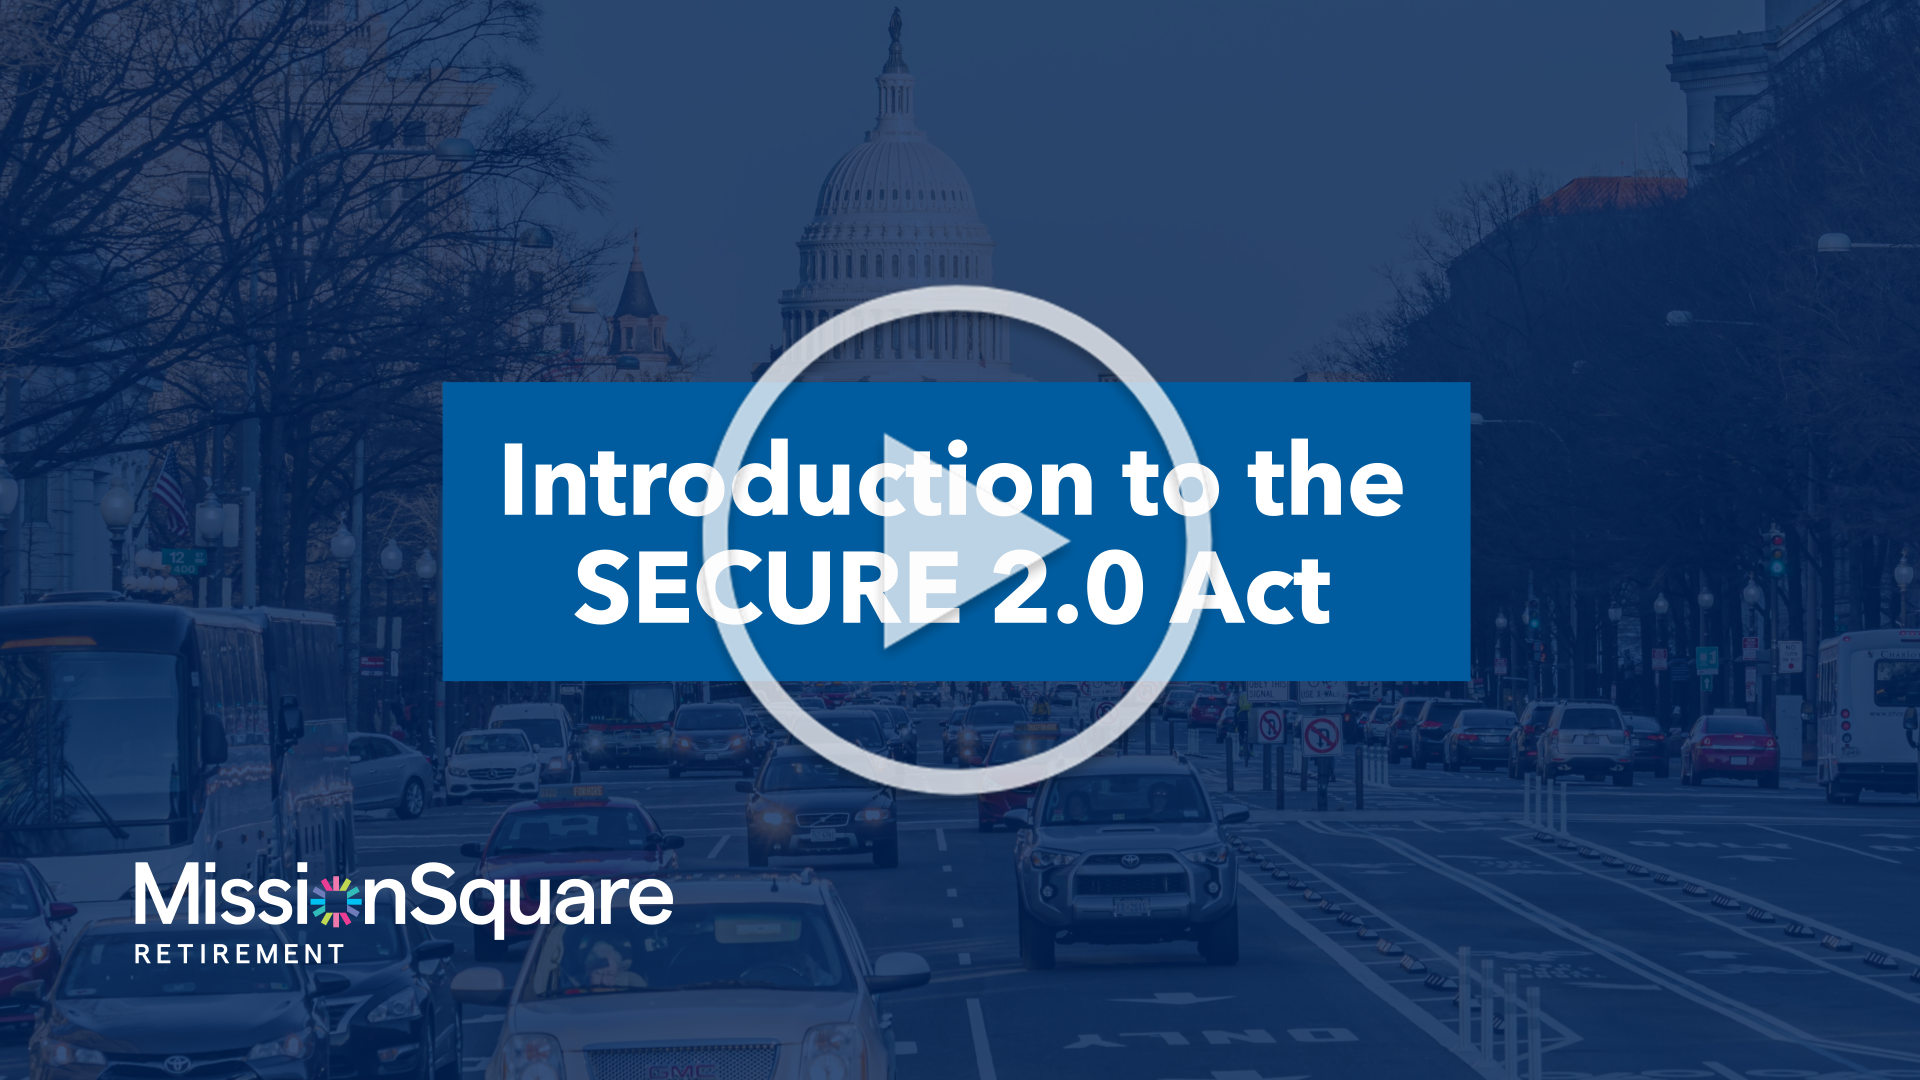 Introduction to the SECURE 2.0 Act